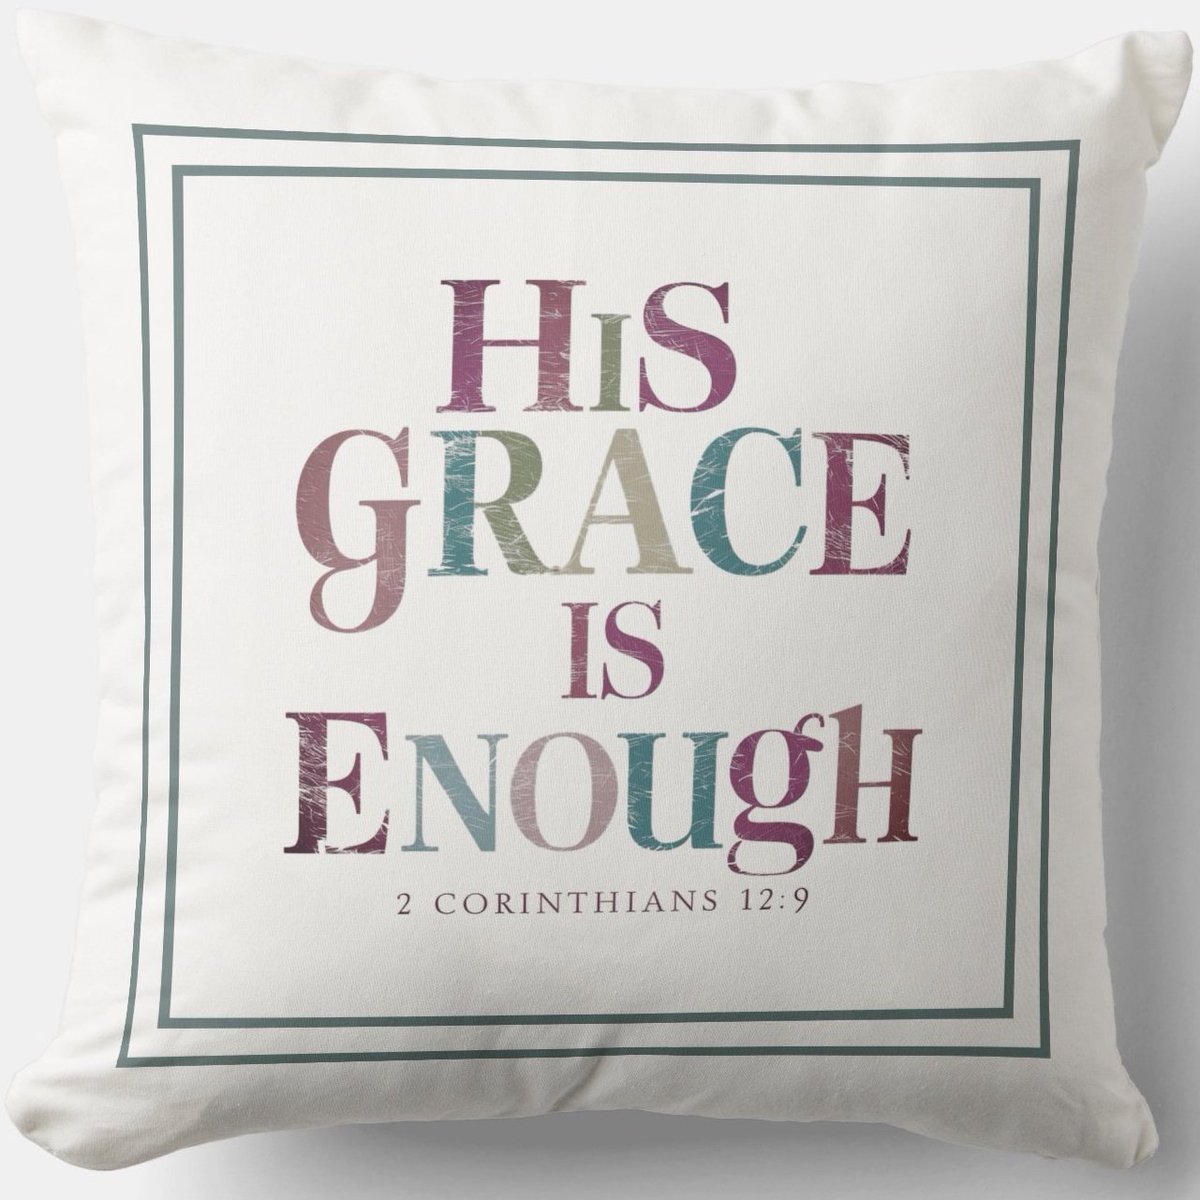 His Grace Is Enough zazzle.com/his_grace_is_e… // 2 Corinthians 12:9 Message #Pillow #Blessing #JesusChrist #JesusSaves #Jesus #christian #spiritual #Homedecoration #uniquegift #giftideas #MothersDayGifts #giftformom #giftidea #HolySpirit #pillows #giftshop #giftsforher #giftsformom